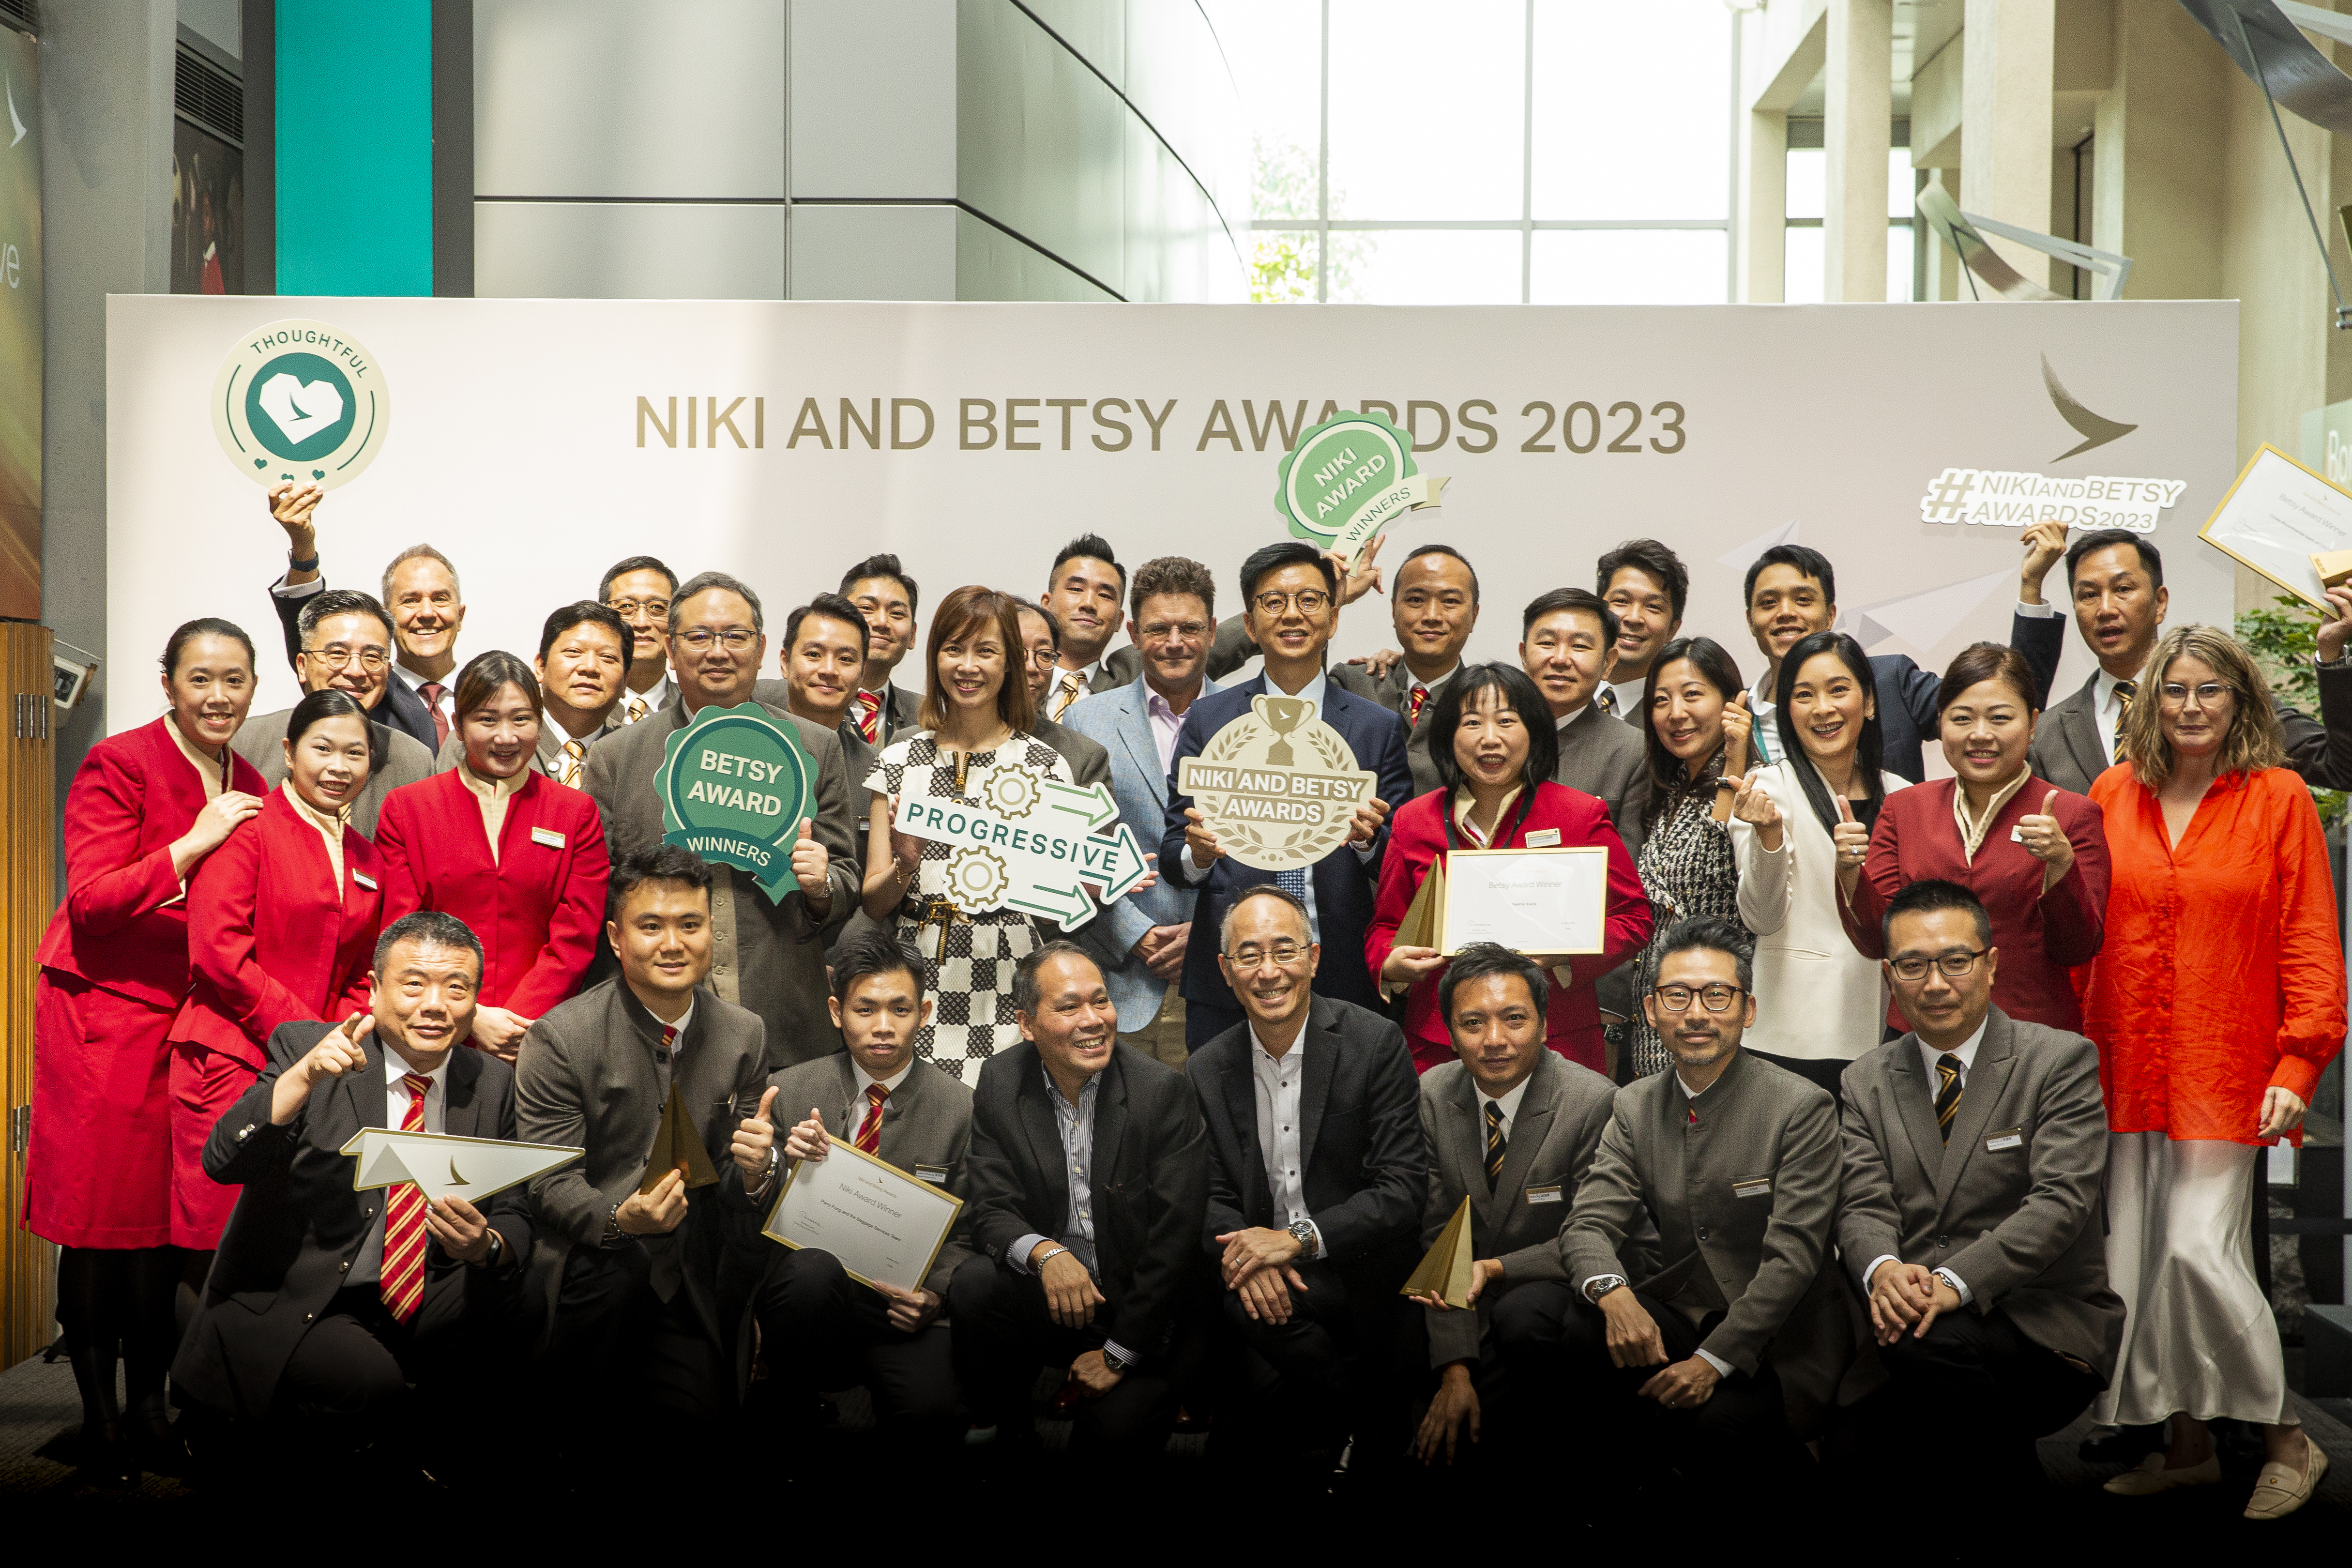 Cathay’s Niki and Betsy Awards are annual internal initiatives honouring outstanding employees’ dedication to service excellence.